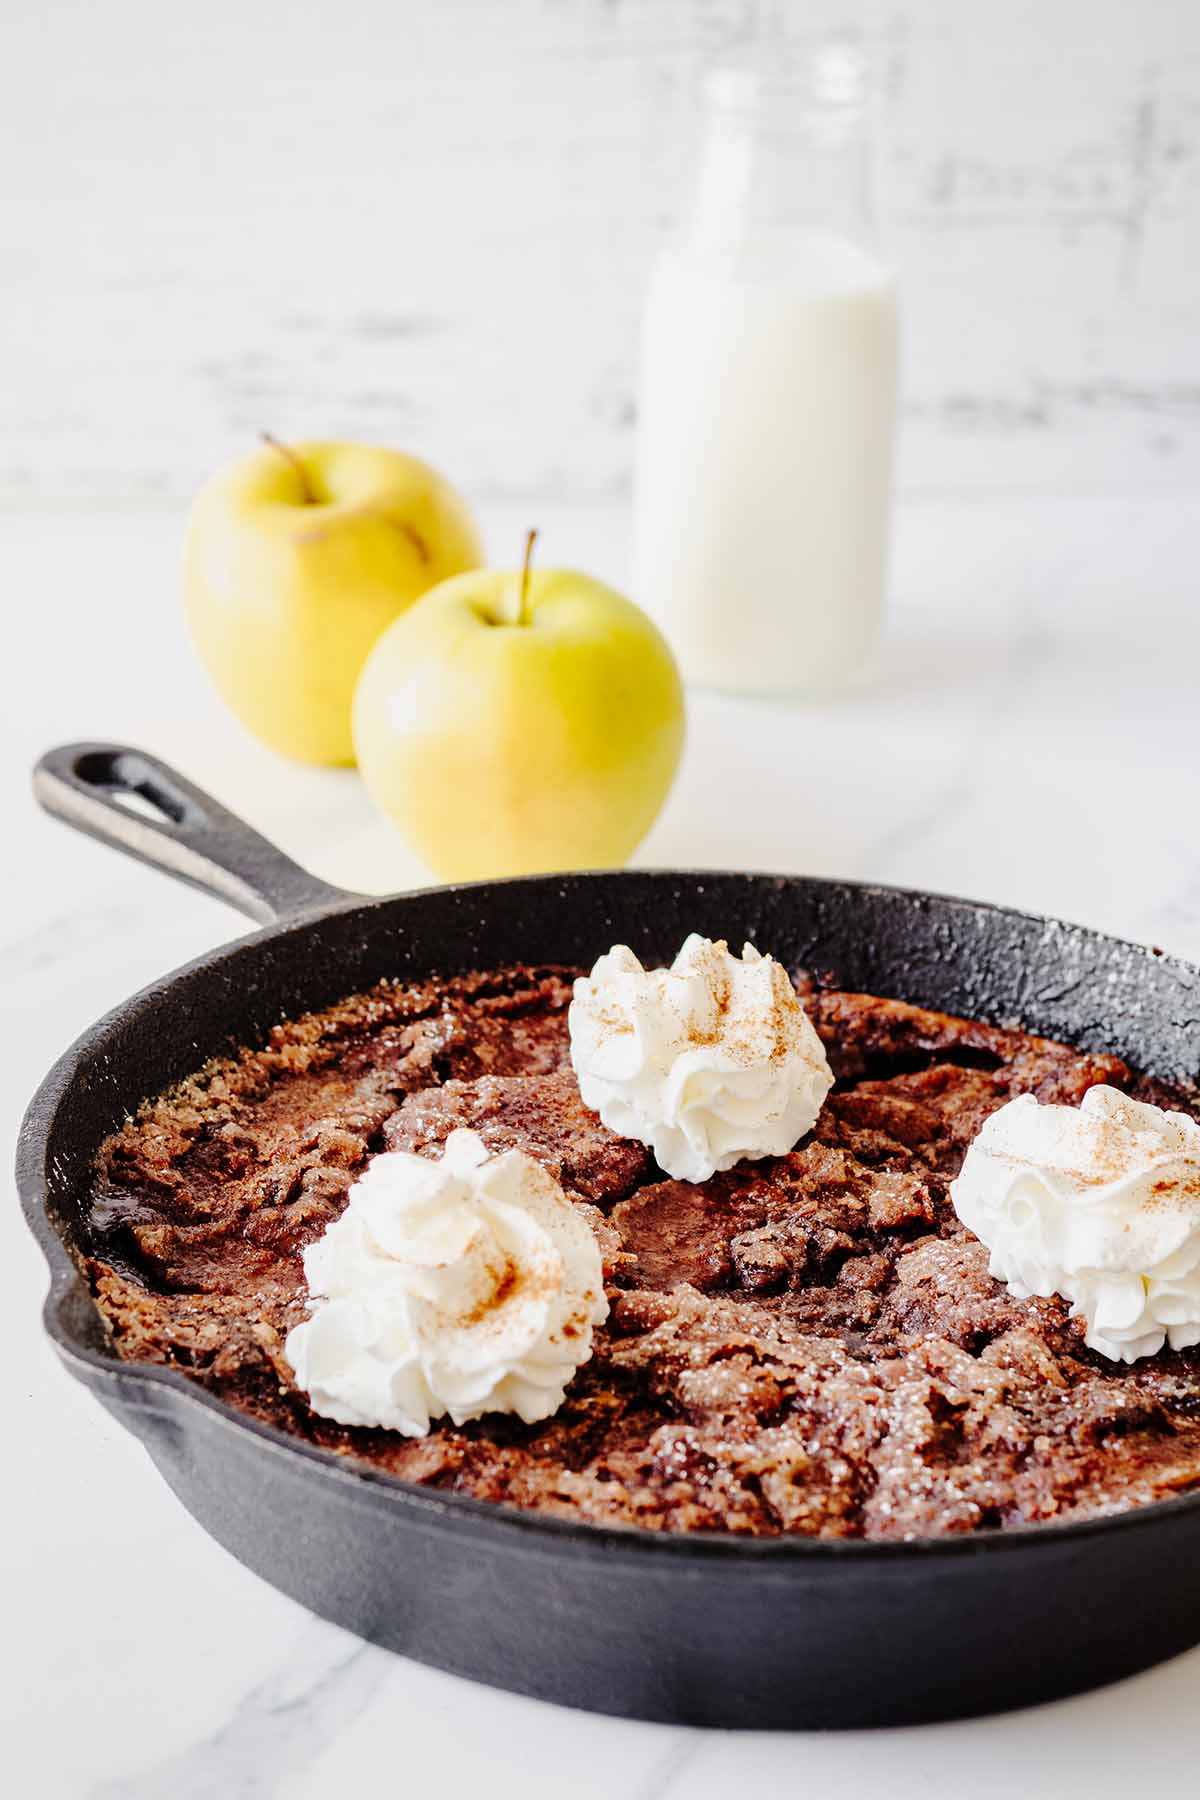 Apple breakfast bake topped with whipped cream in a cast iron skillet with apples and milk in the background